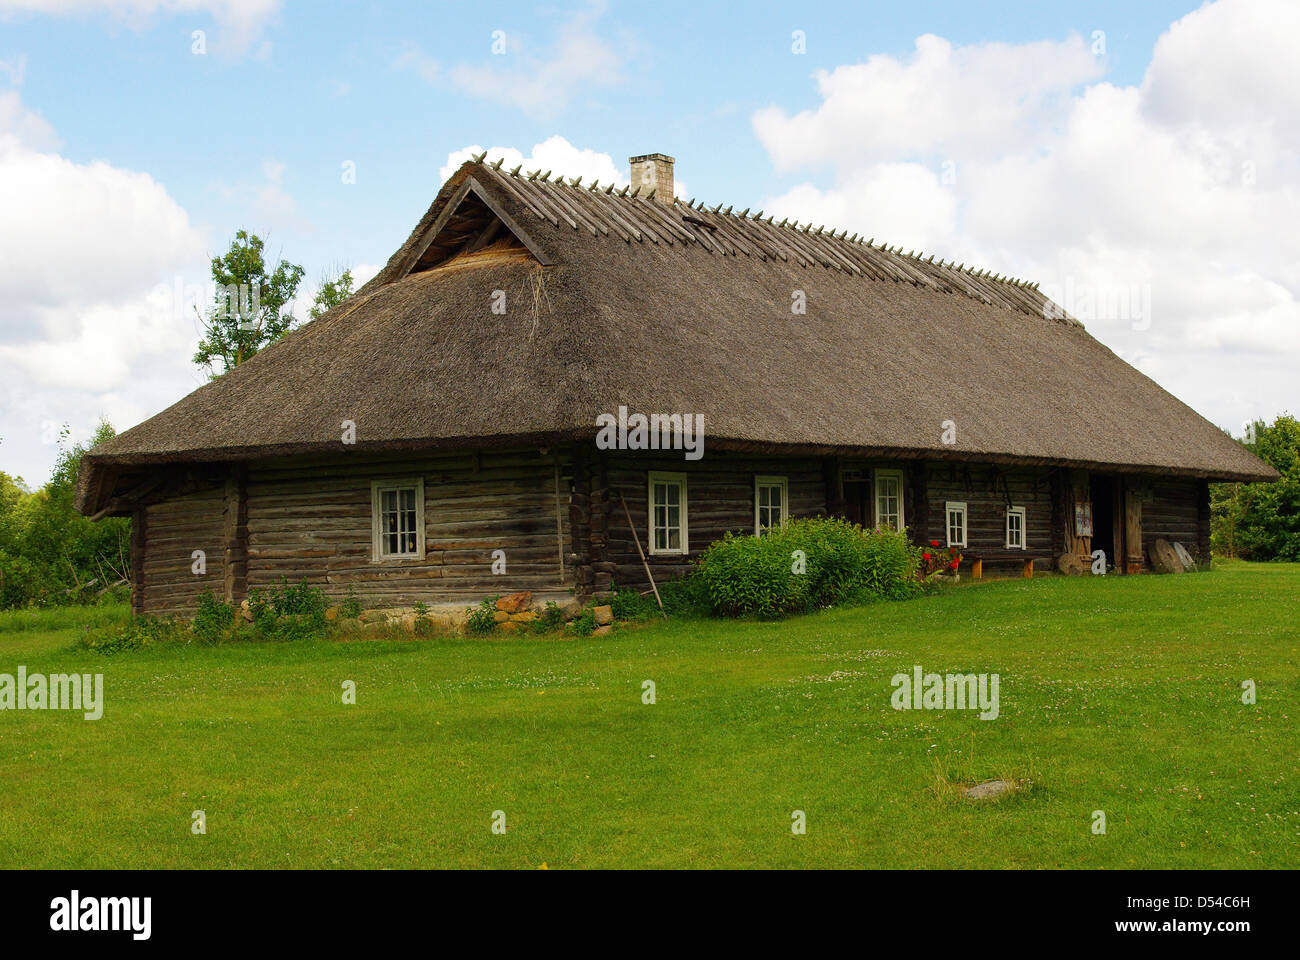 Old traditional log house / cottage in Estonia Stock Photo